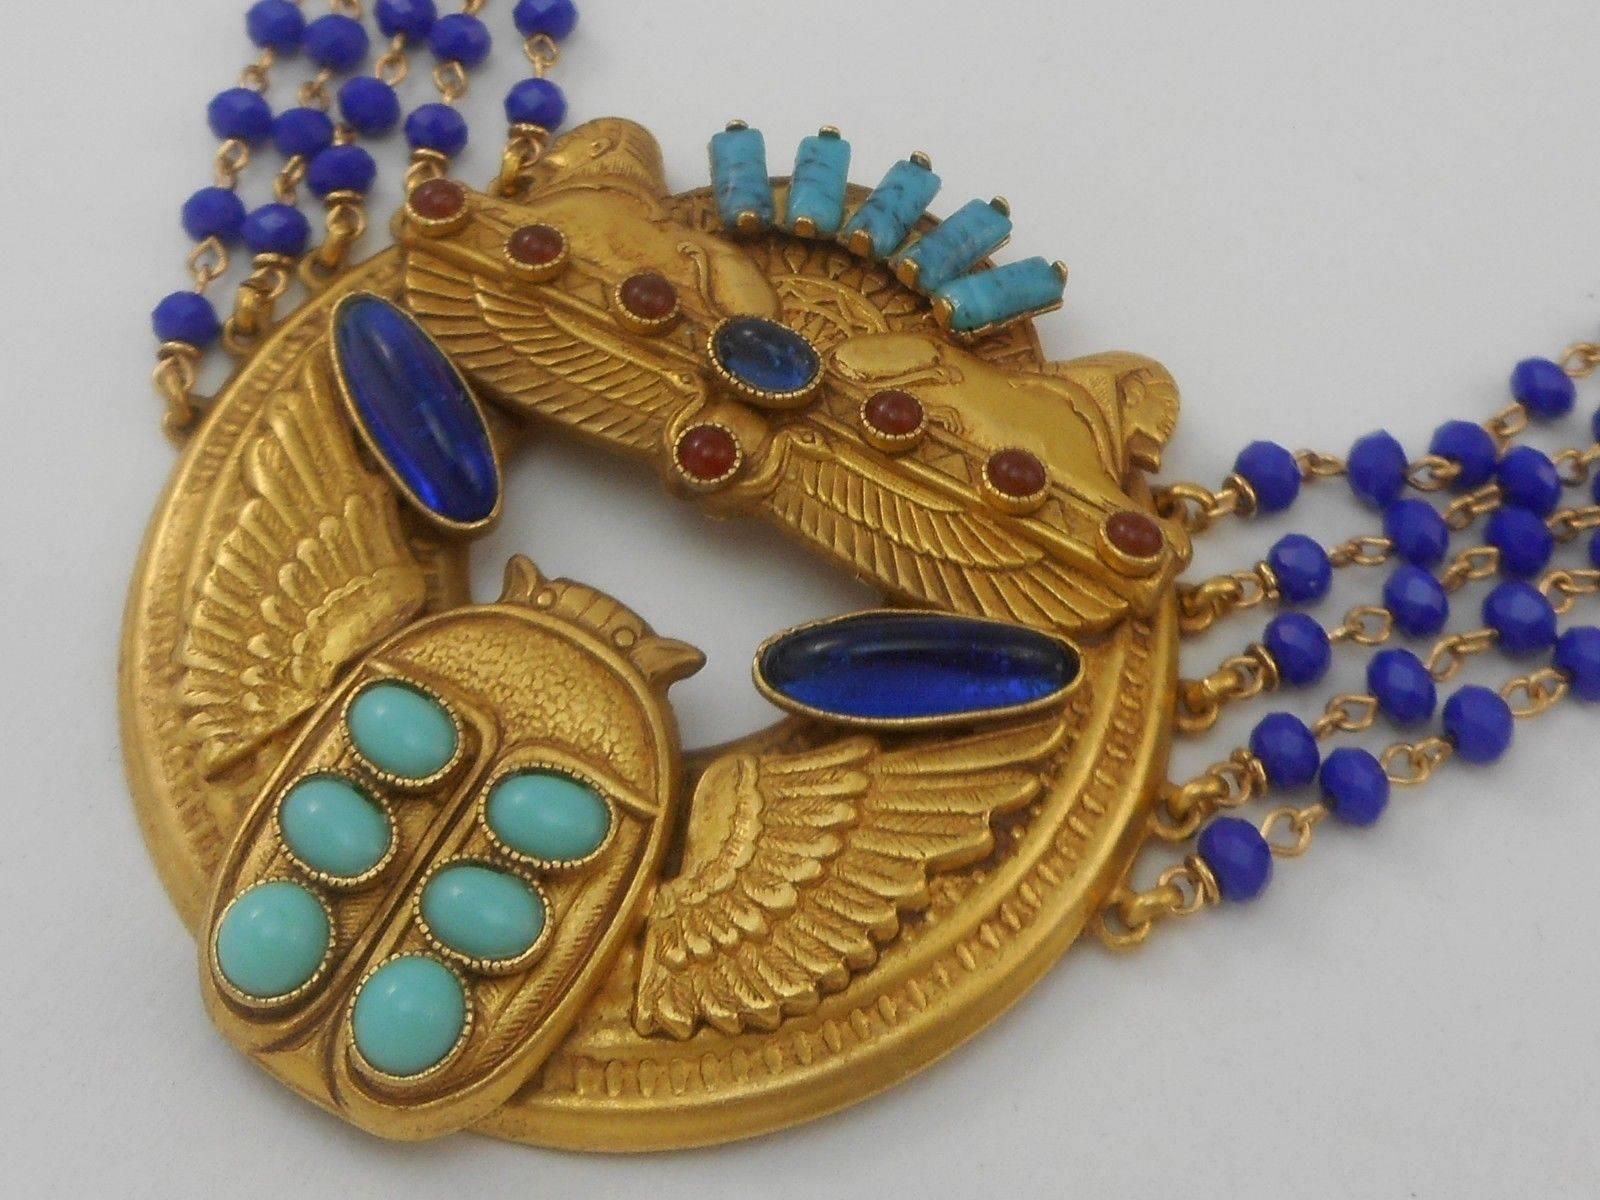 Contemporary Askew London 'Egyptian Revival' Sphinx and Scarab Statement Necklace